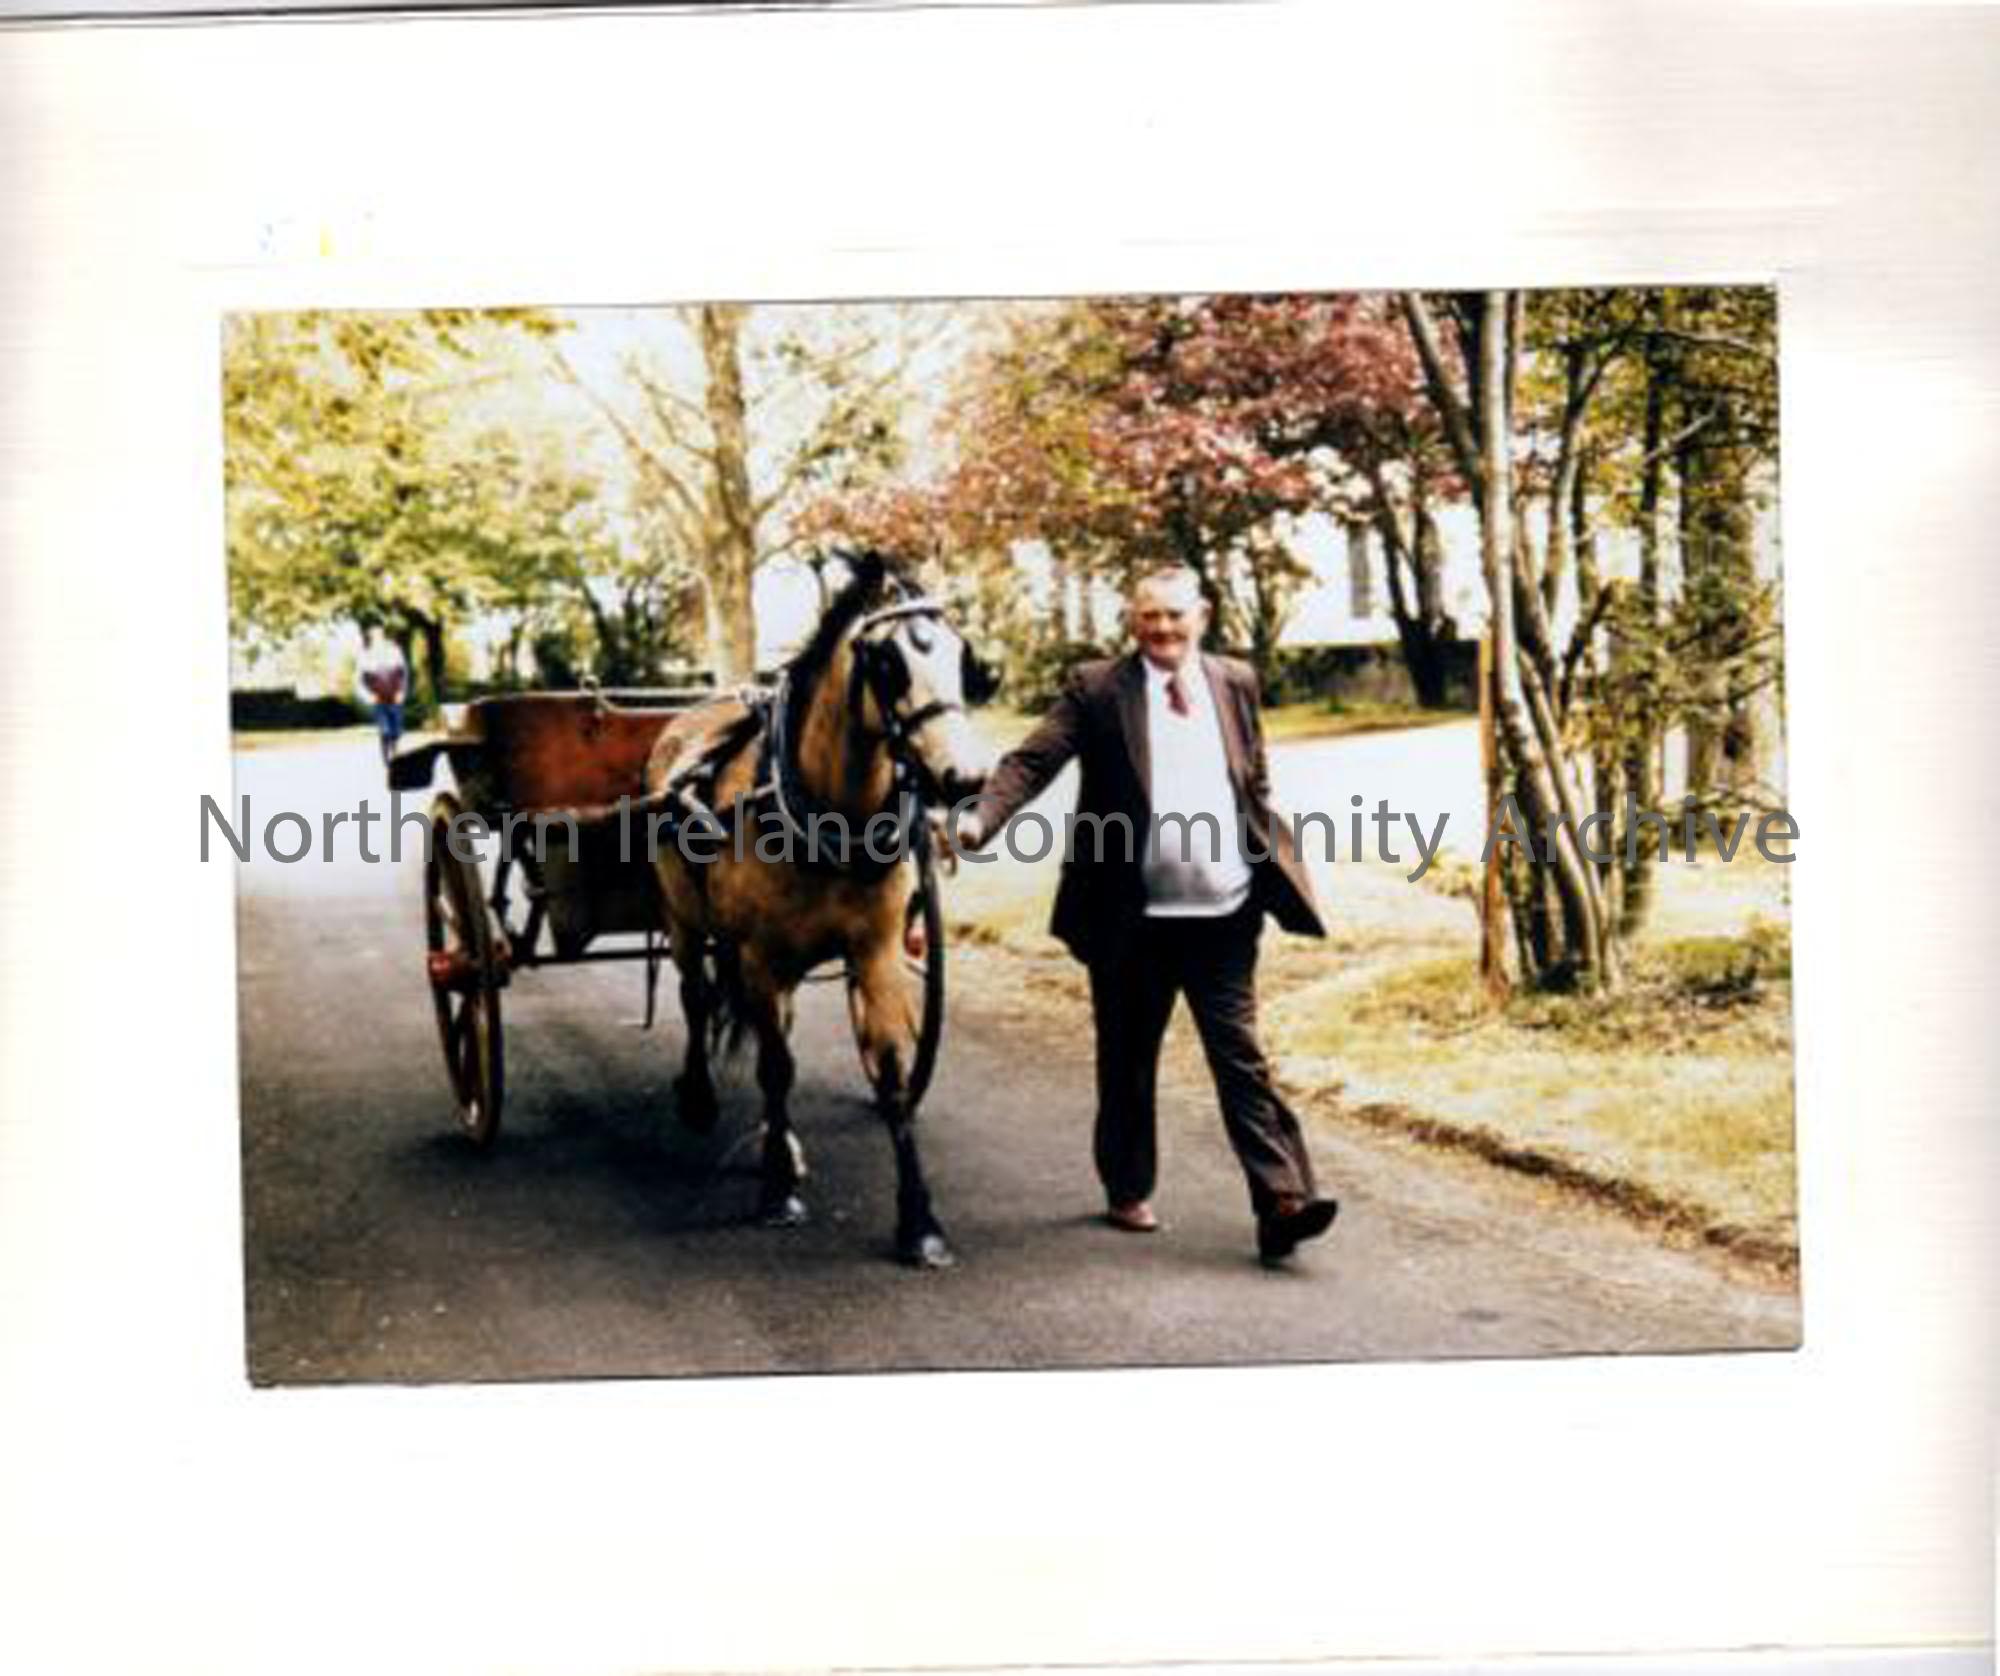 Johnny McKinney, lifelong postman in Dervock, walking a pony and trap down the Church of Ireland Rectory driveway. Purpose being for giving rides to children during Dervock Civic Week. (3222)